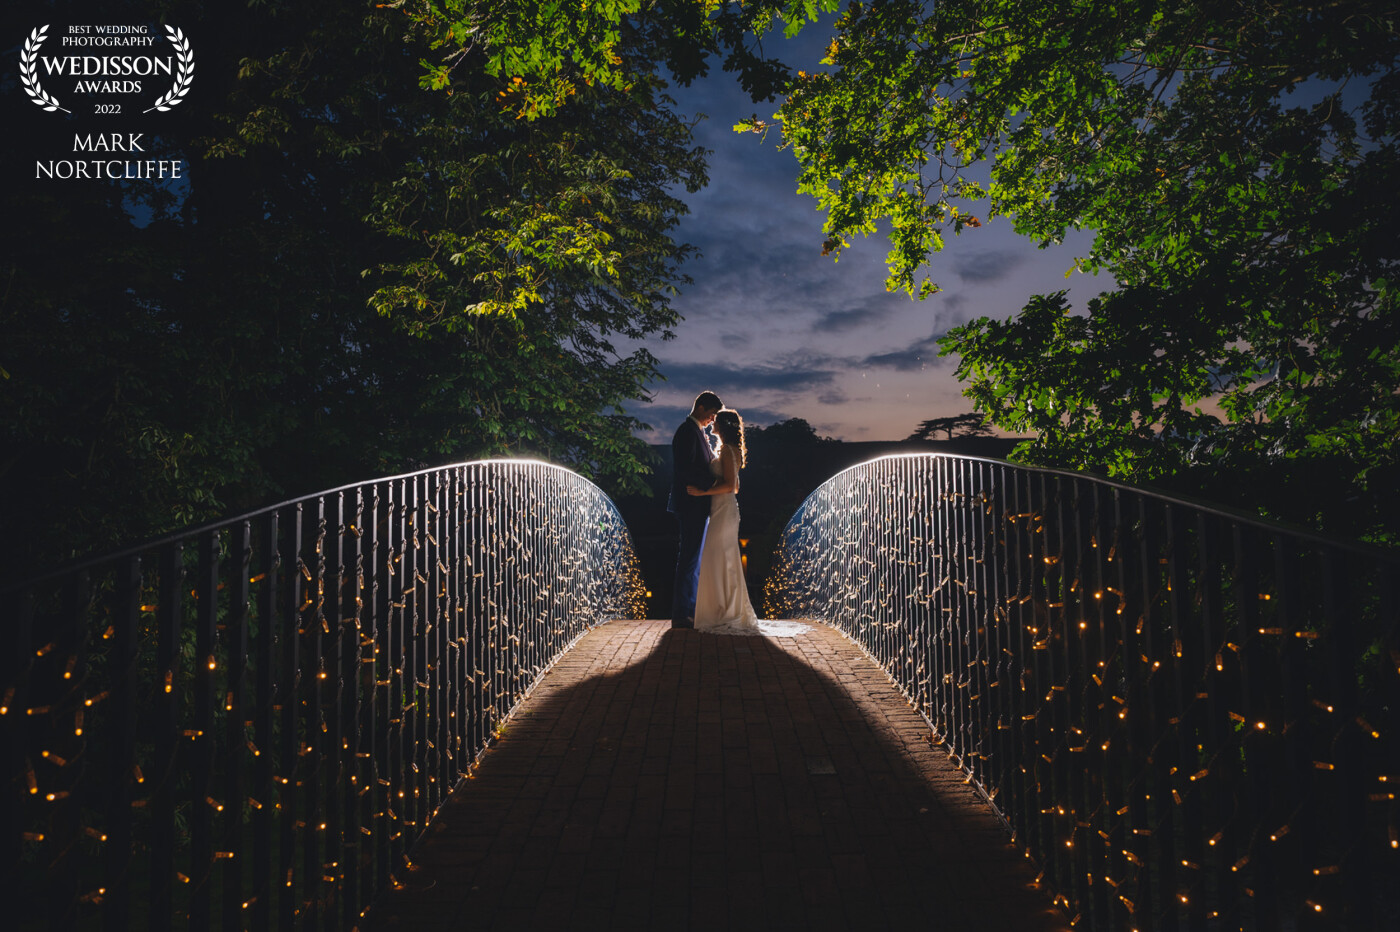 Beautiful balmy late summer evening at Bassmead Manor Barns. I love it when my couples are prepared to leave their guests to capture shots like this. The sky was awesome and the bridge is a perfect backdrop to frame the couple in the trees. The party inside was banging too! Fab wedding day ❤️<br />
<br />
Venue Bassmead Manor Barns, Cambridgeshire